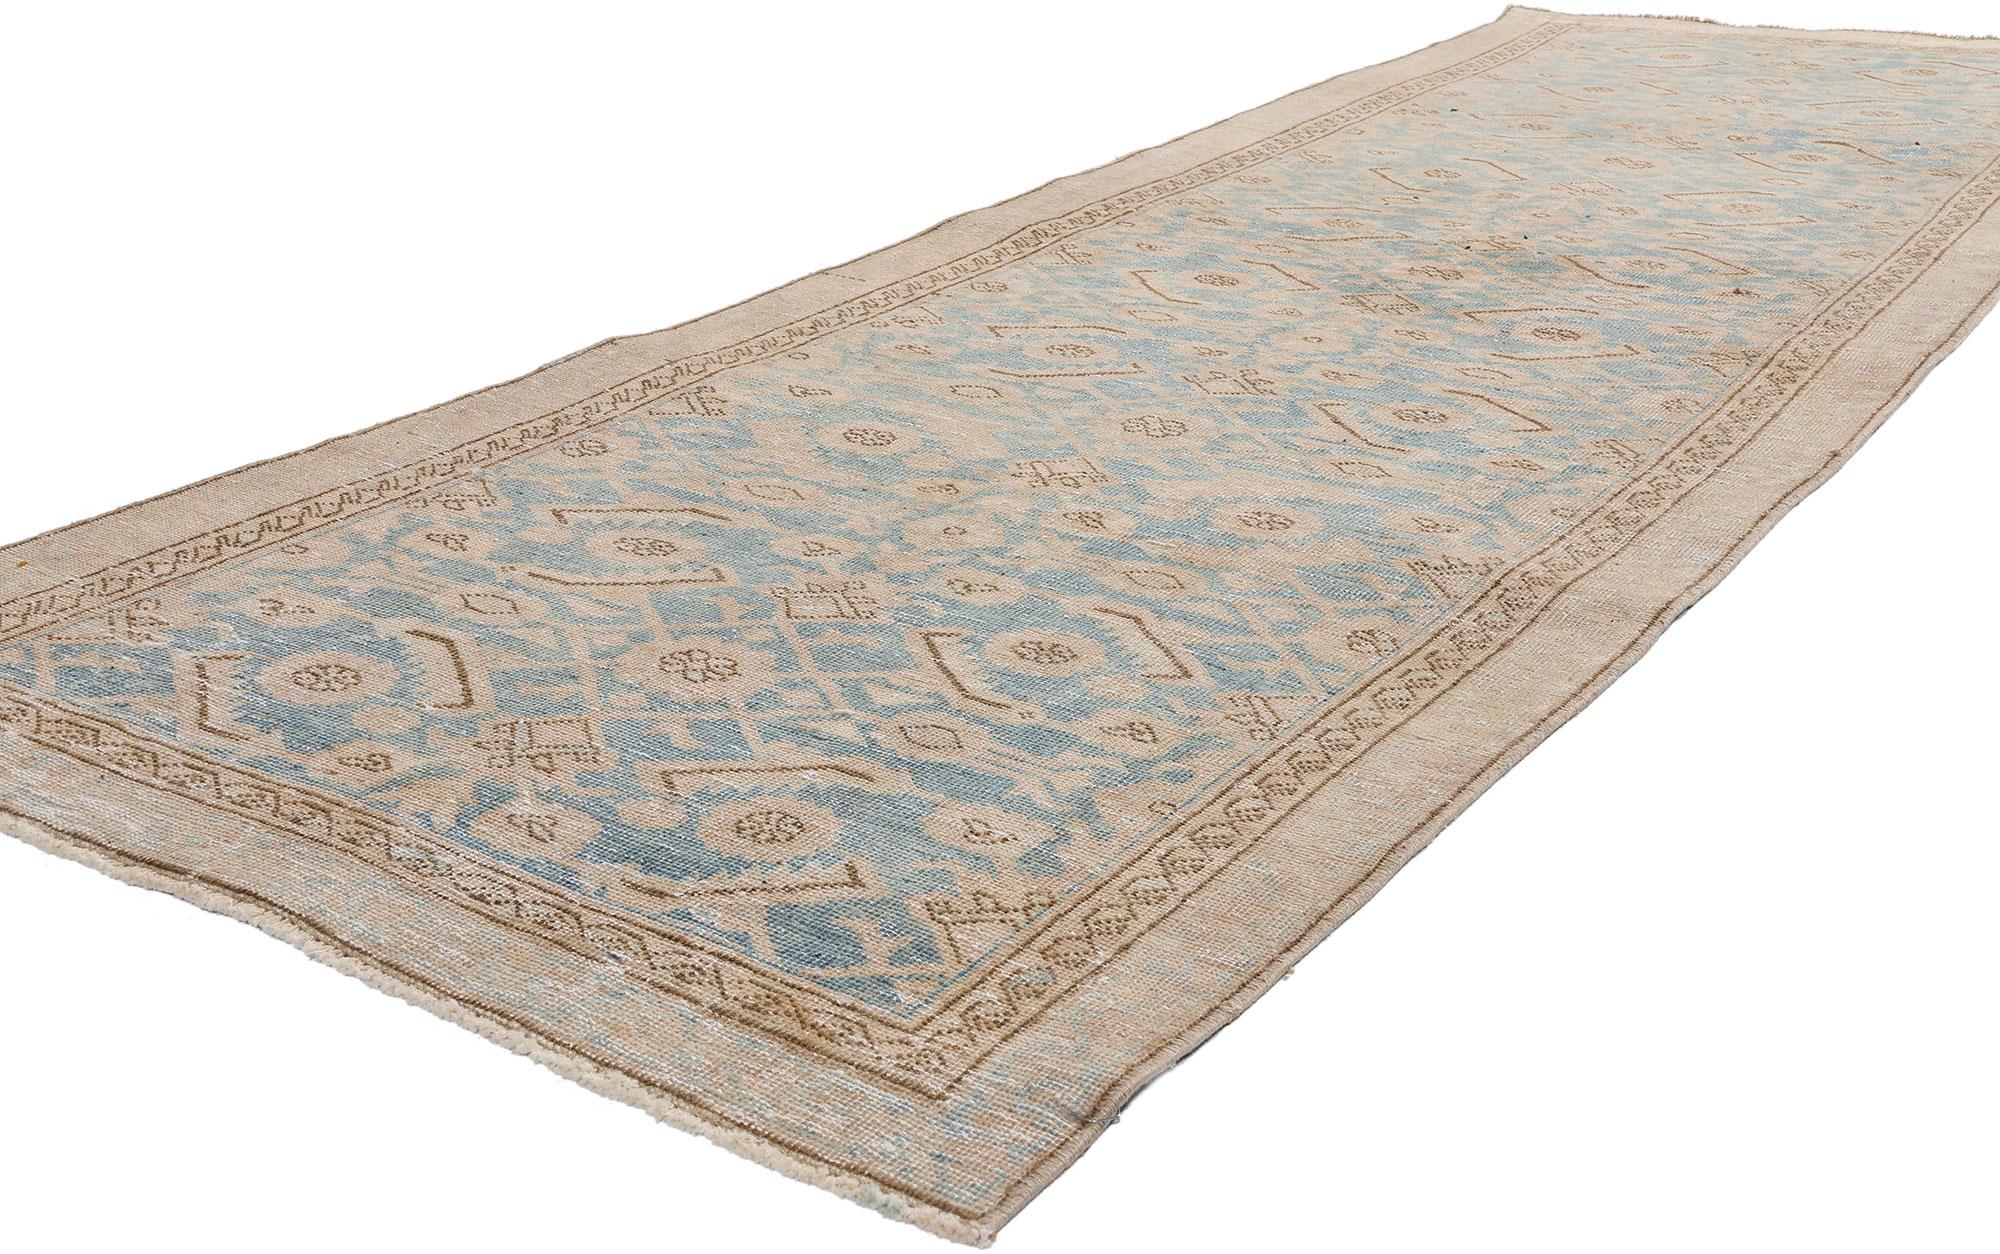 53922 Distressed Vintage Blue Persian Malayer Rug Runner, 03'01 x 09'09. Antique-washed Persian Malayer runners are long, narrow rugs handcrafted in the Malayer region of western Iran and treated with a special antique washing process to achieve a